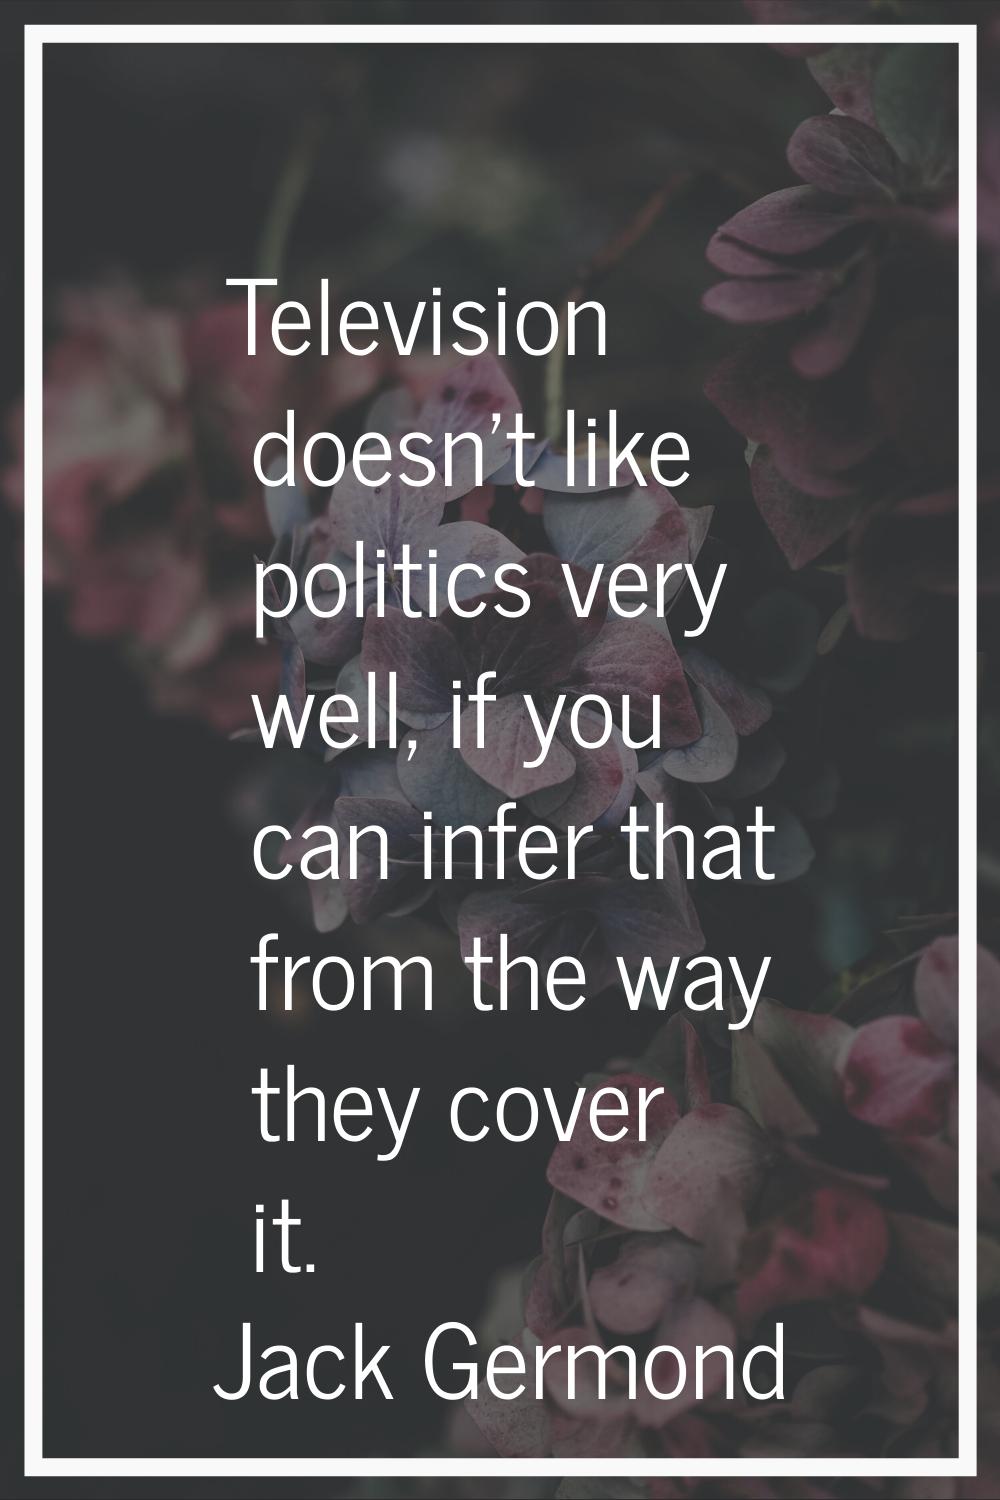 Television doesn't like politics very well, if you can infer that from the way they cover it.